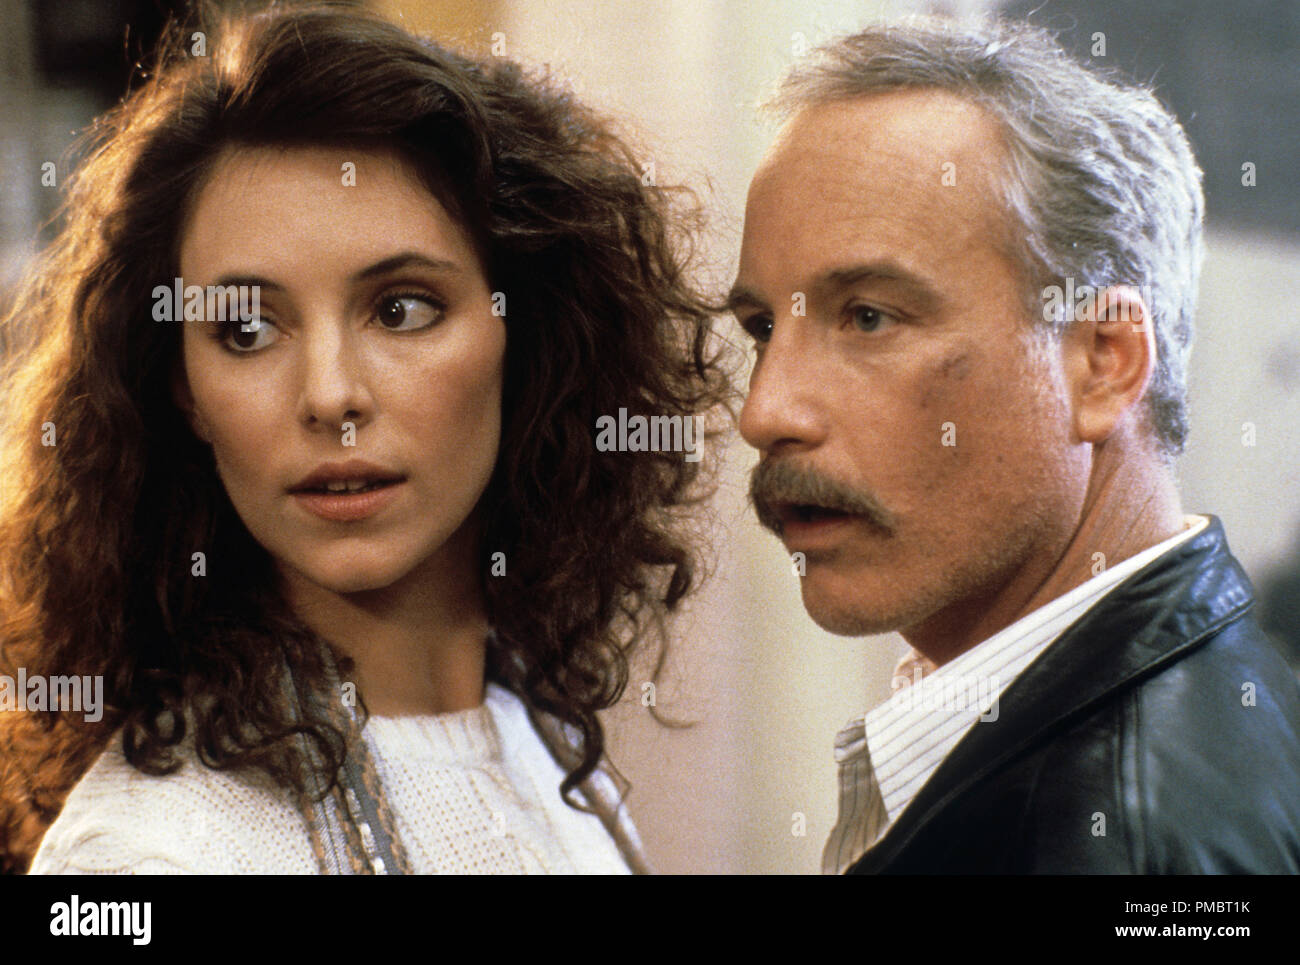 Studio Publicity Still from 'Stakeout'  Madeleine Stowe and Richard Dreyfuss  © 1987 Touchstone Pictures   All Rights Reserved   File Reference # 32914 192THA  For Editorial Use Only Stock Photo